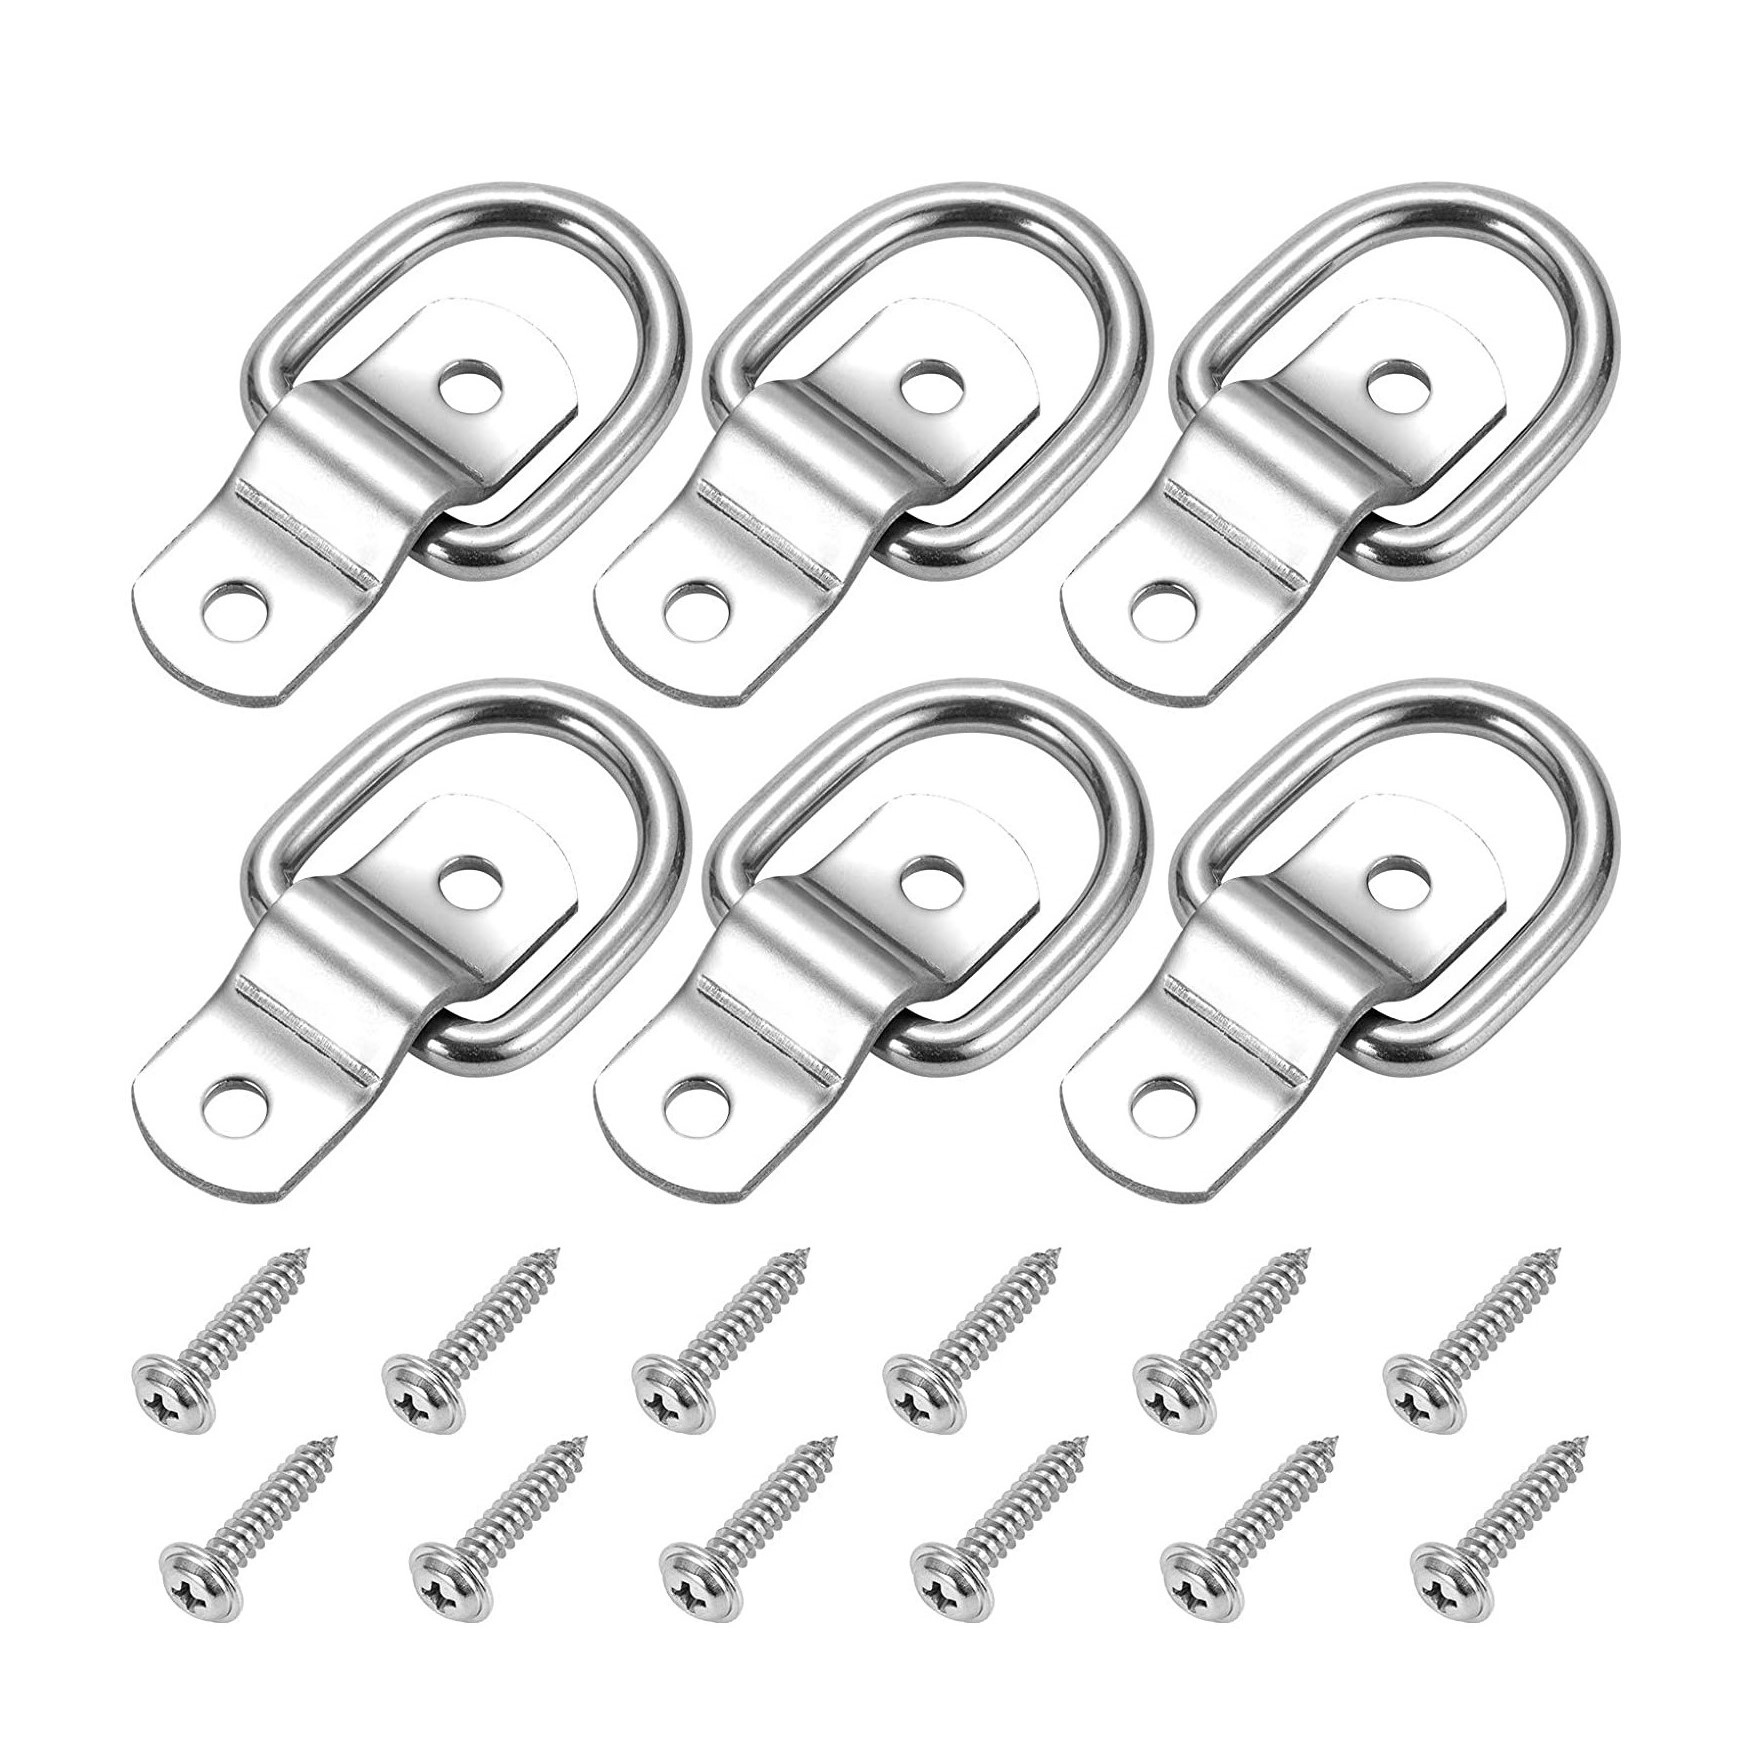 102074S 1/4″ Stainless Steel Trailer Tie Down Hooks D Ring Tie Down Anchors With Screws Featured Image